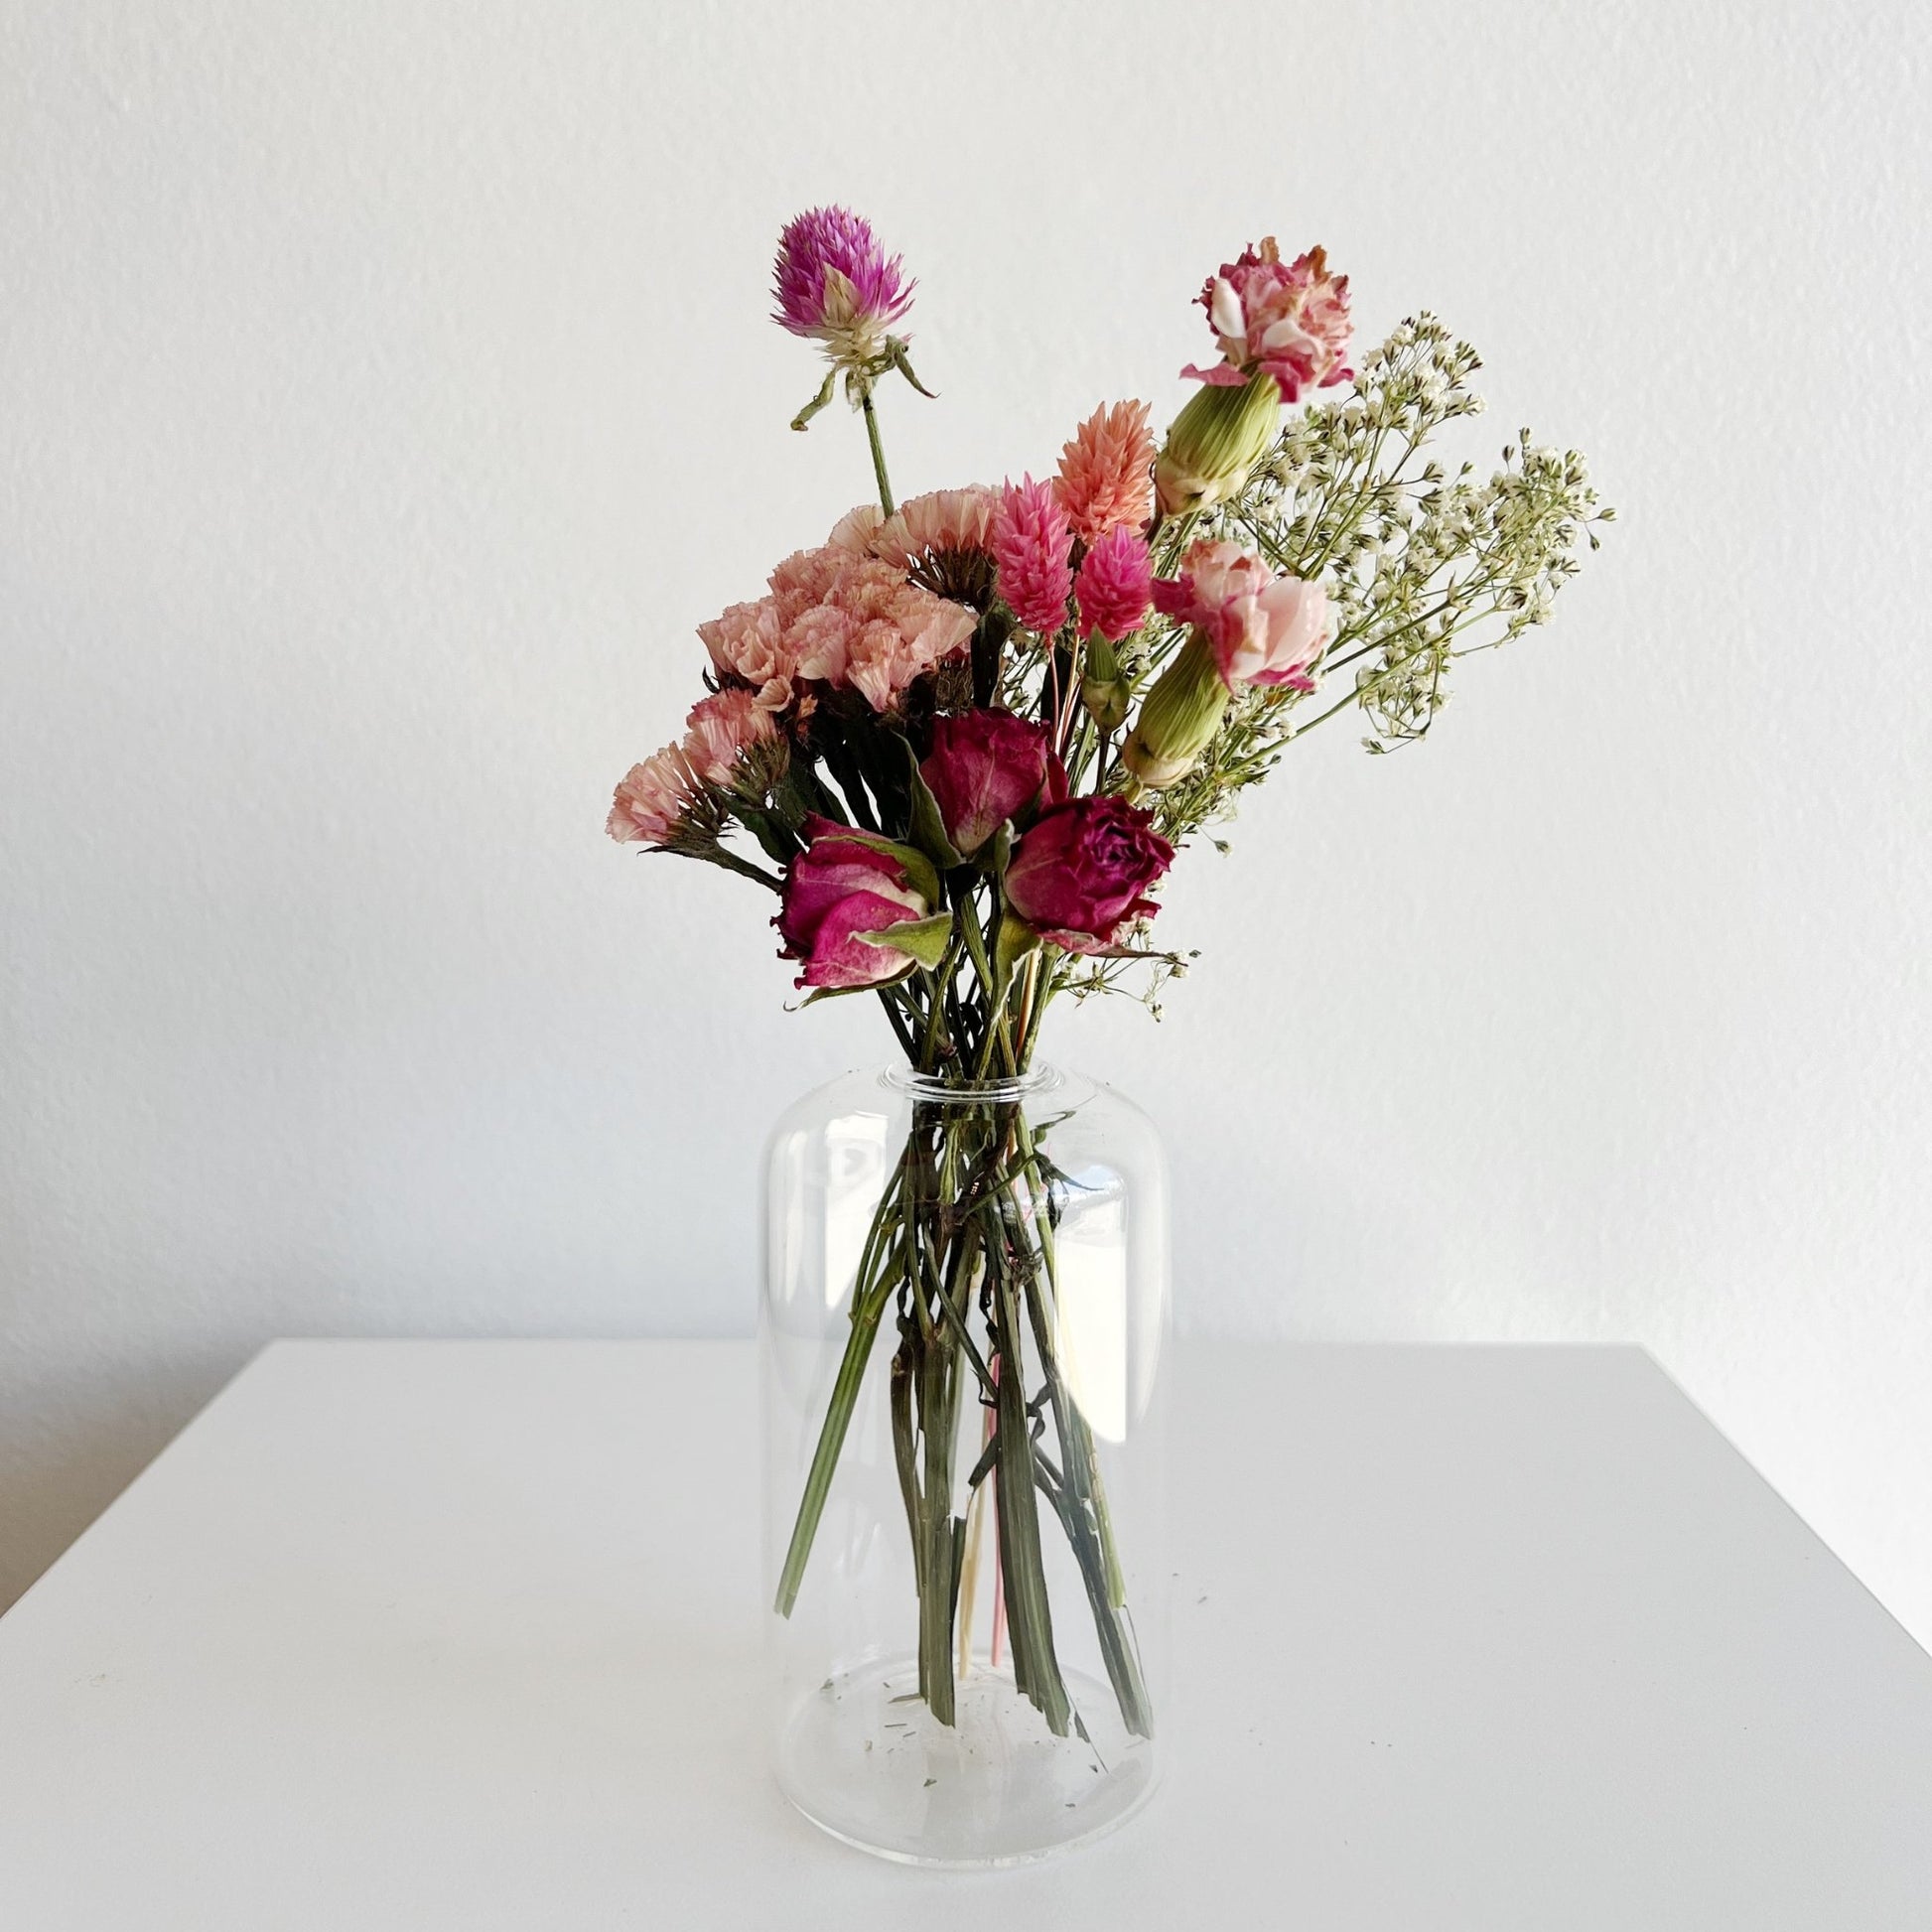 Your Guide For How to Care for Dried Flowers